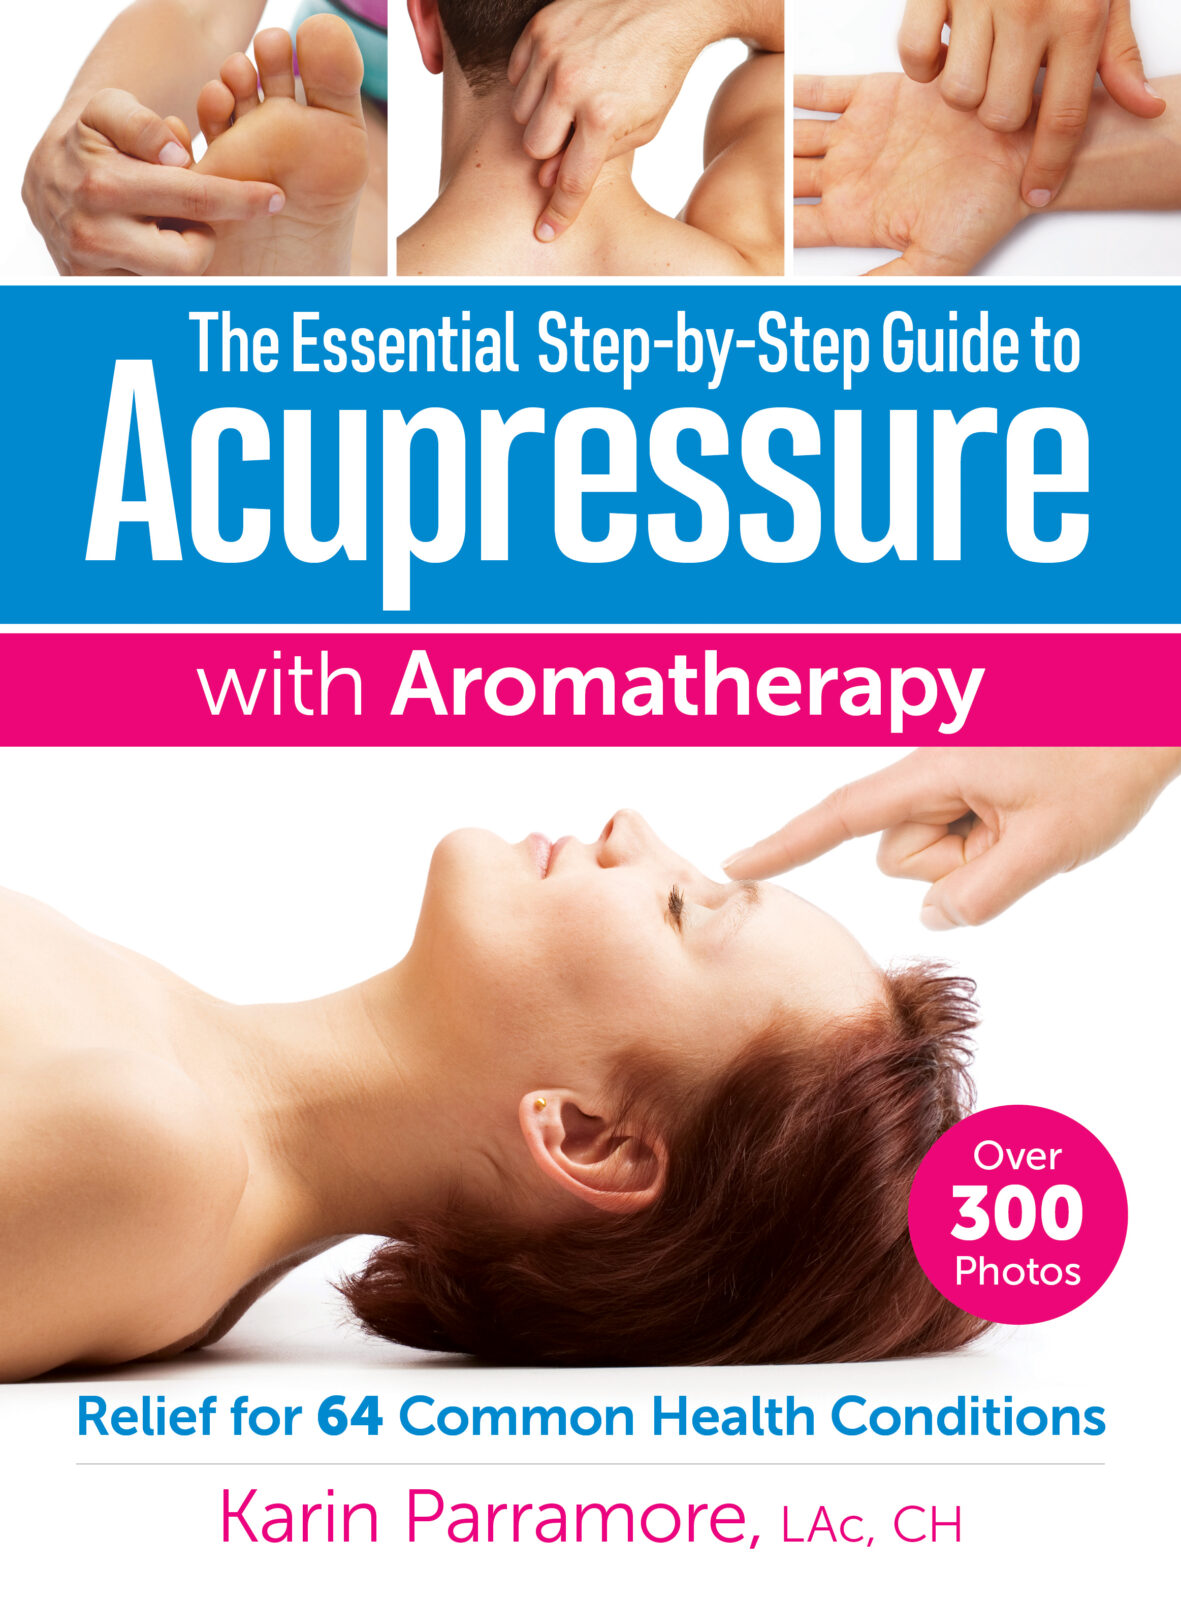 The Essential Step-by-Step Guide to Acupressure with Aromatherapy